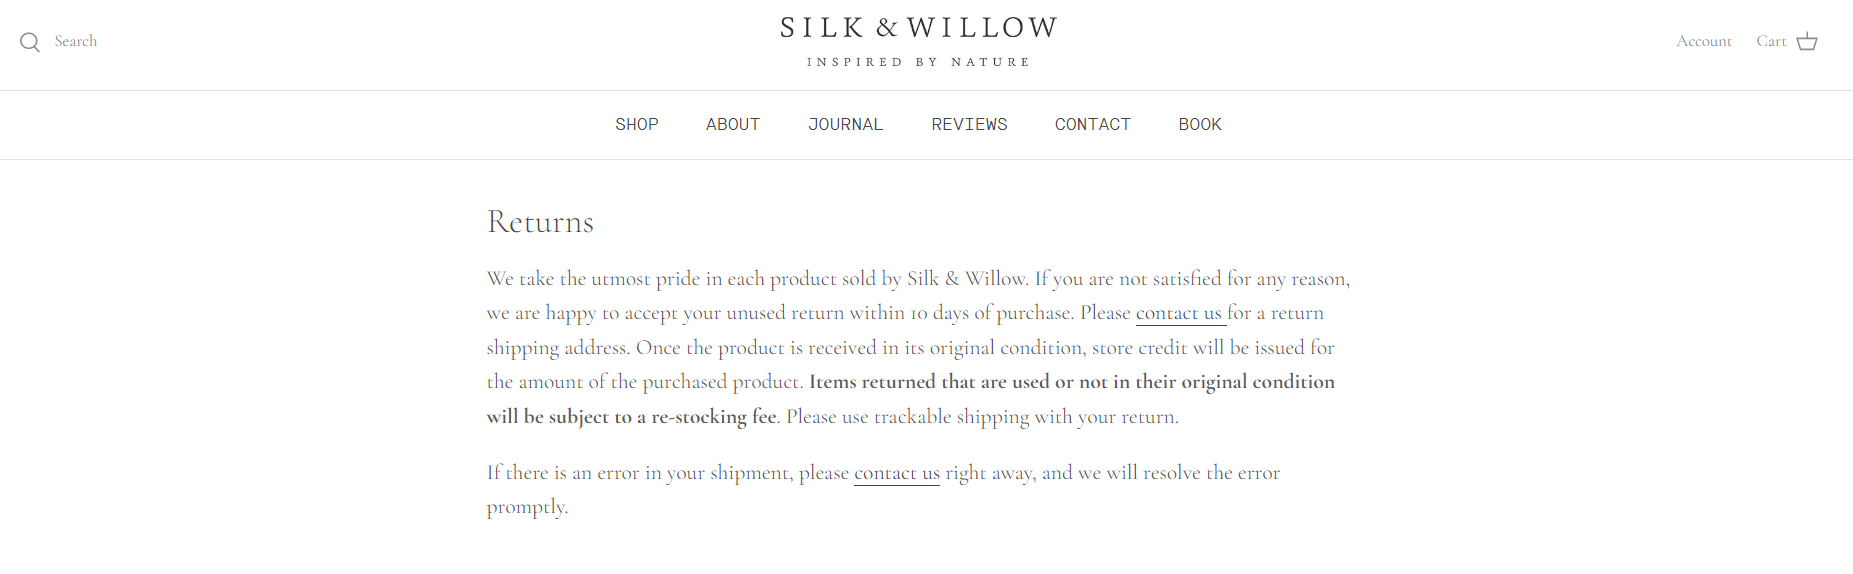 Shopify return policy examples for Art and Handmade Goods stores – Silk and Willow